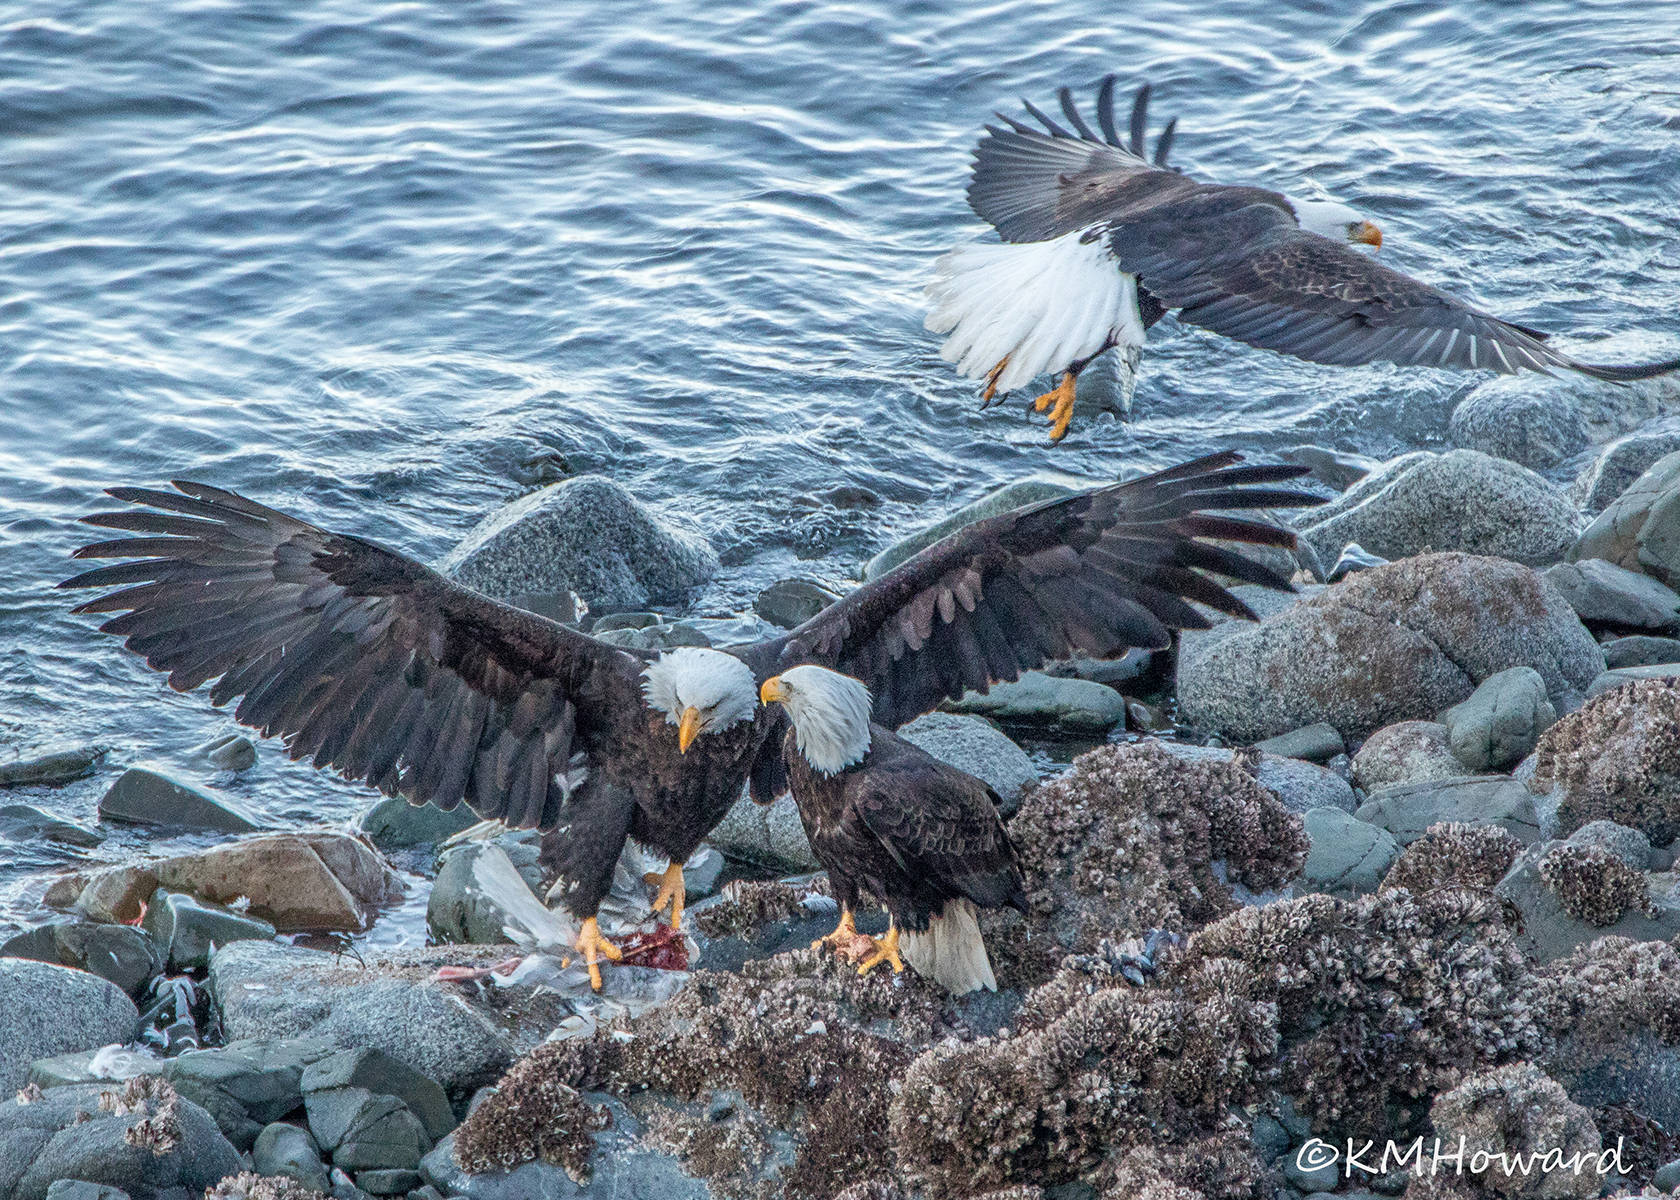 Photo by Kerry Howard Three bald eagles fight over a dead seagull in Lena Cove.